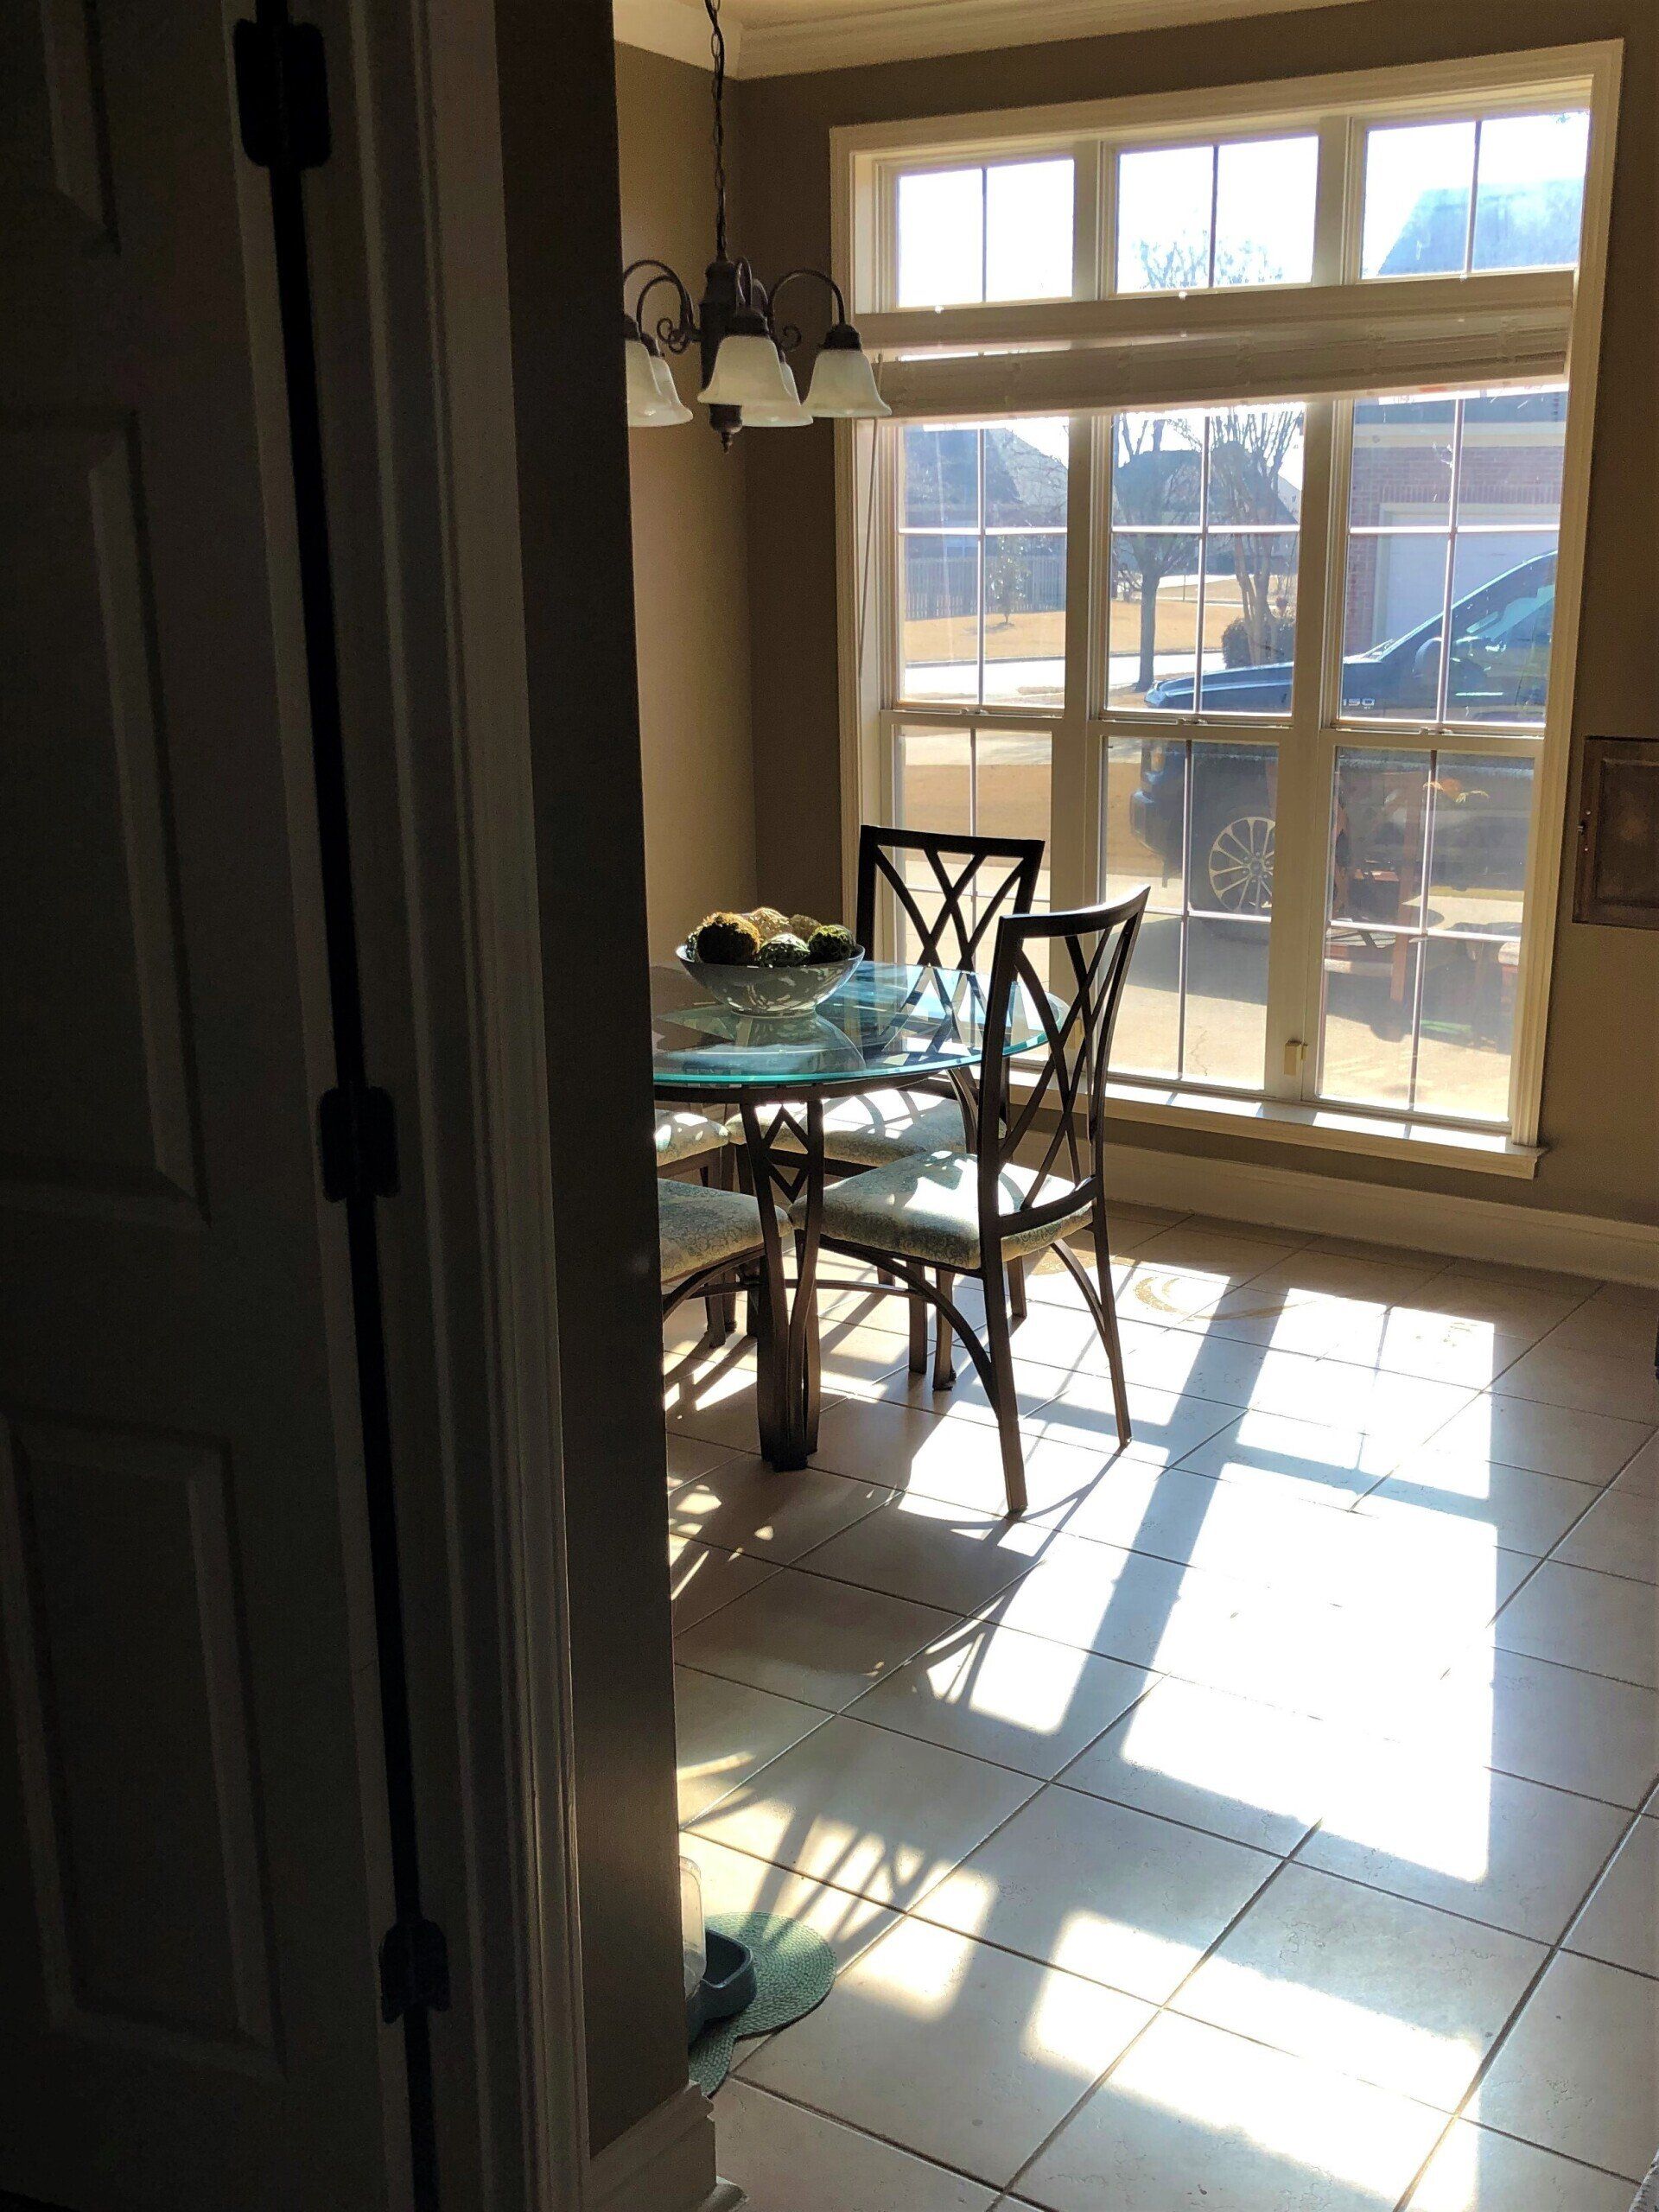 home window tint in AL - Bright UV Sun damage was prevented with SPF residential tint in AL